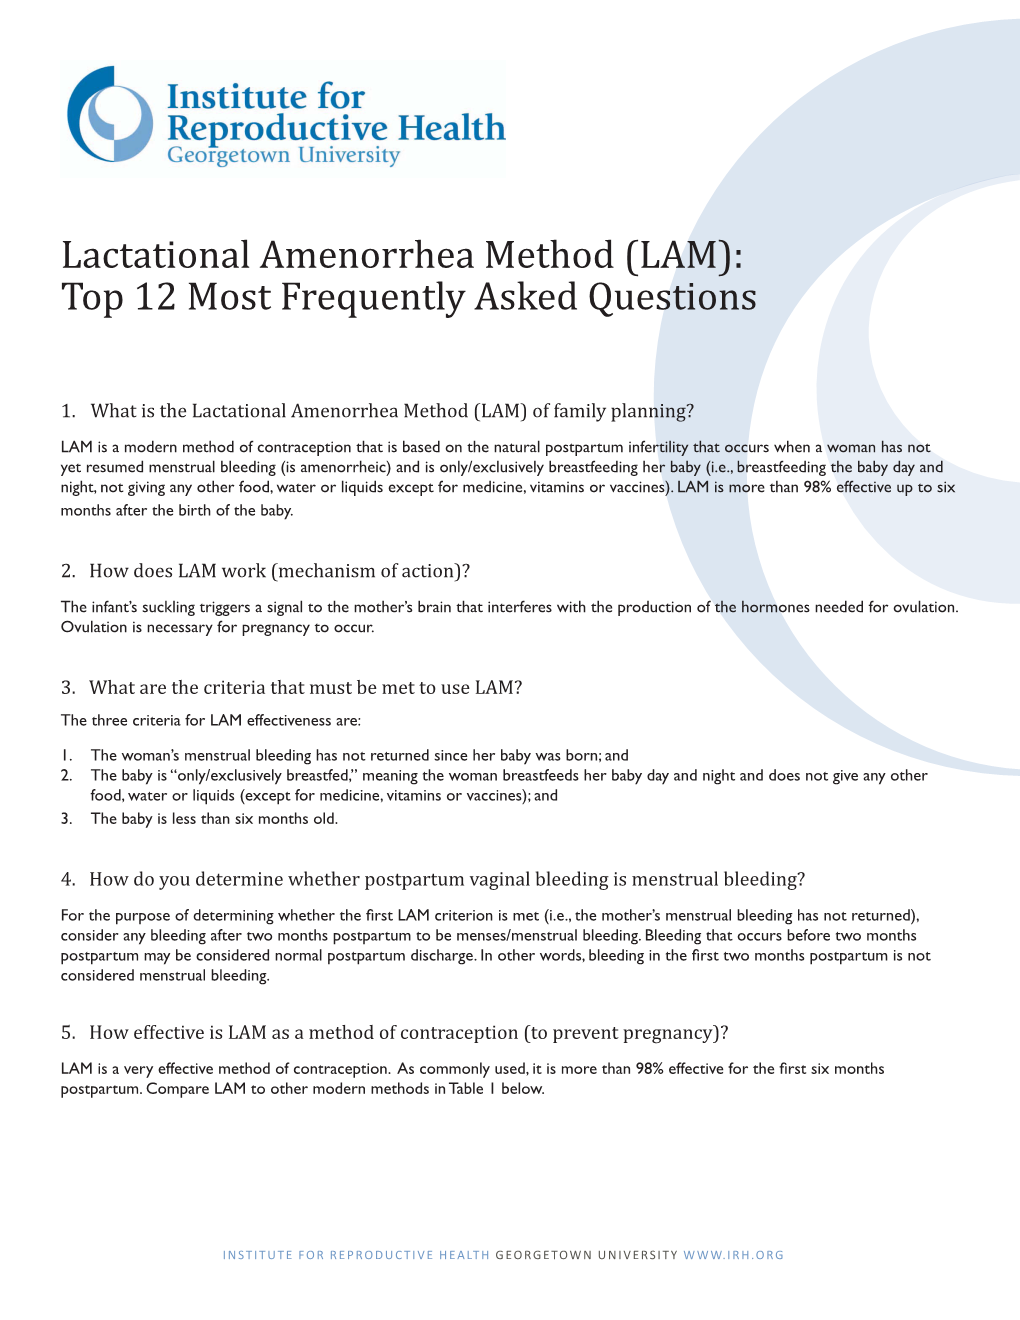 Lactational Amenorrhea Method (LAM): Top 12 Most Frequently Asked Questions